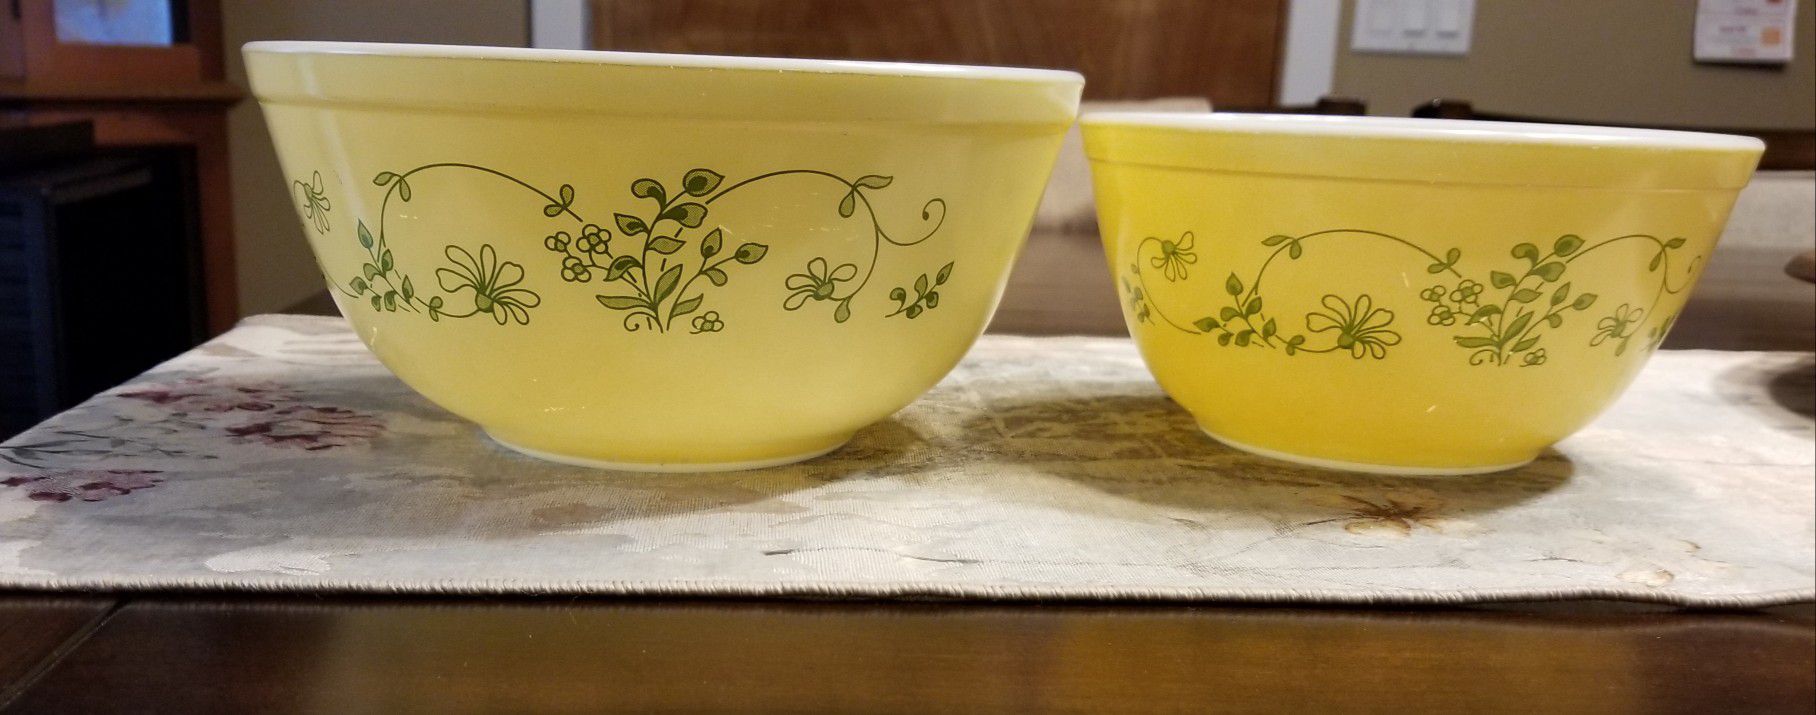 WONDERFUL! Two Pyrex Mixing Bowls Buttery Yellow W/Green Ivy